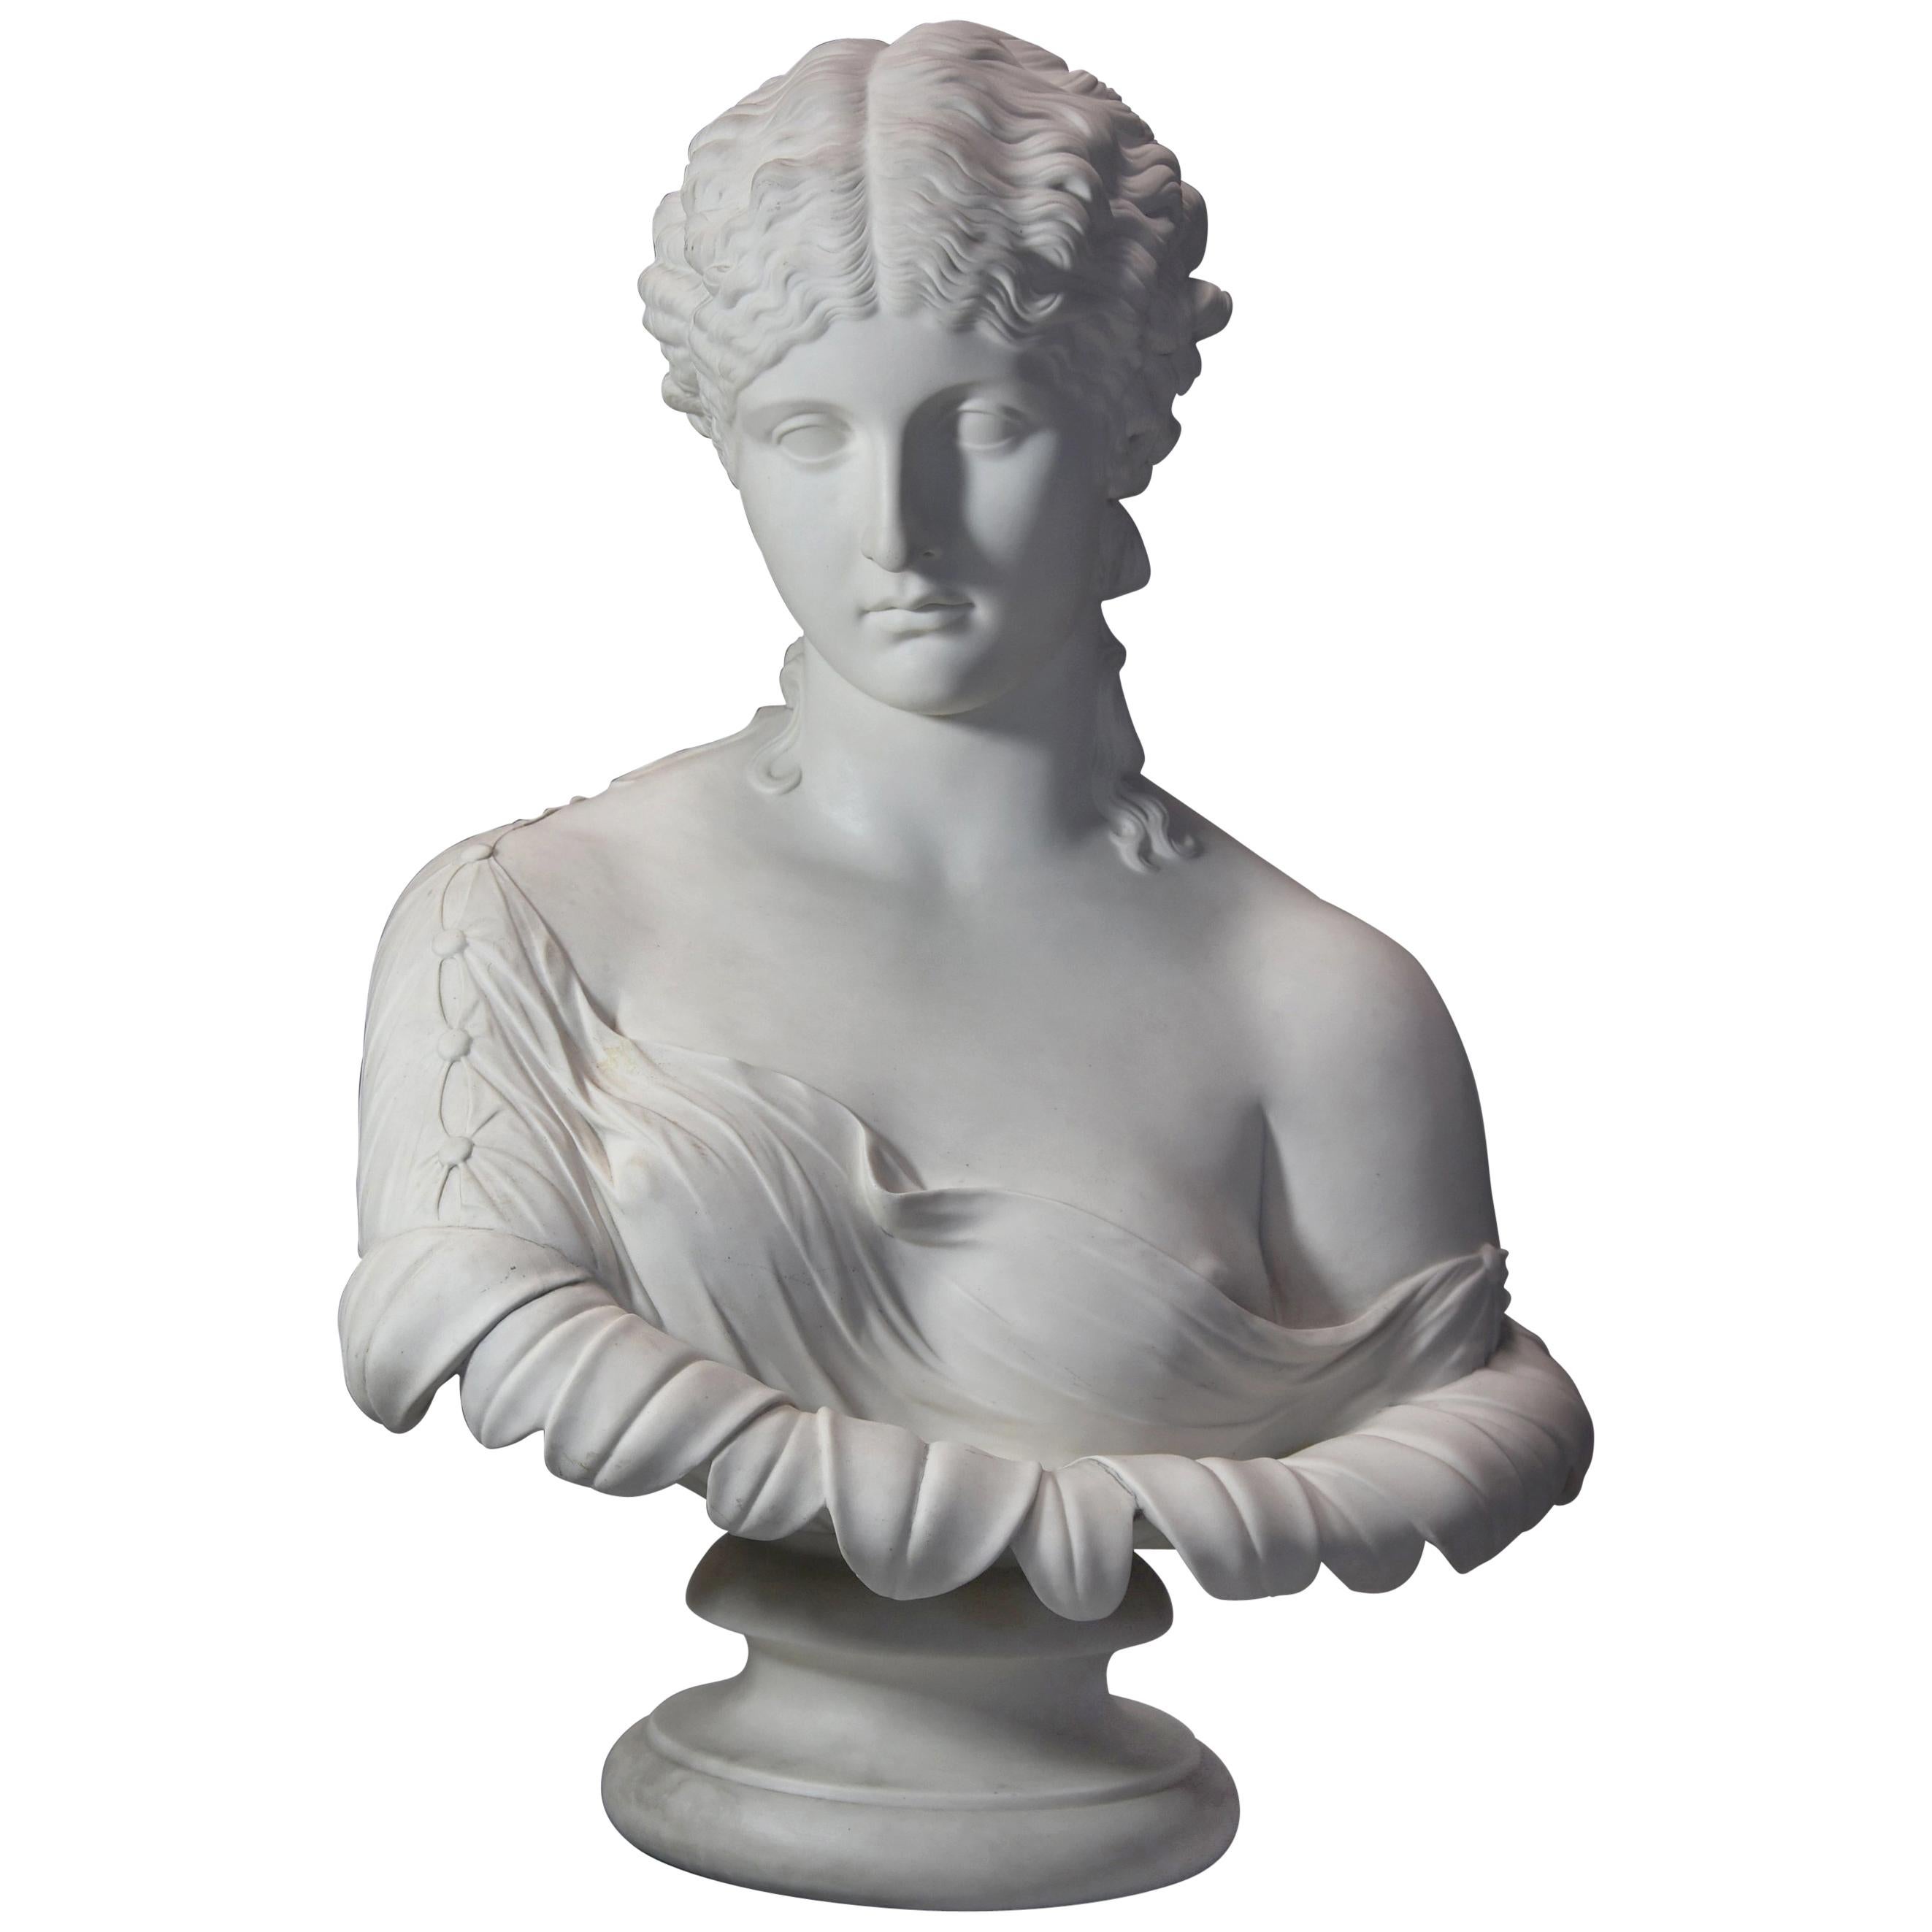 Decorative Large Mid-19th Century Parian Bust of ‘Clytie’, Stamped ‘Copeland'